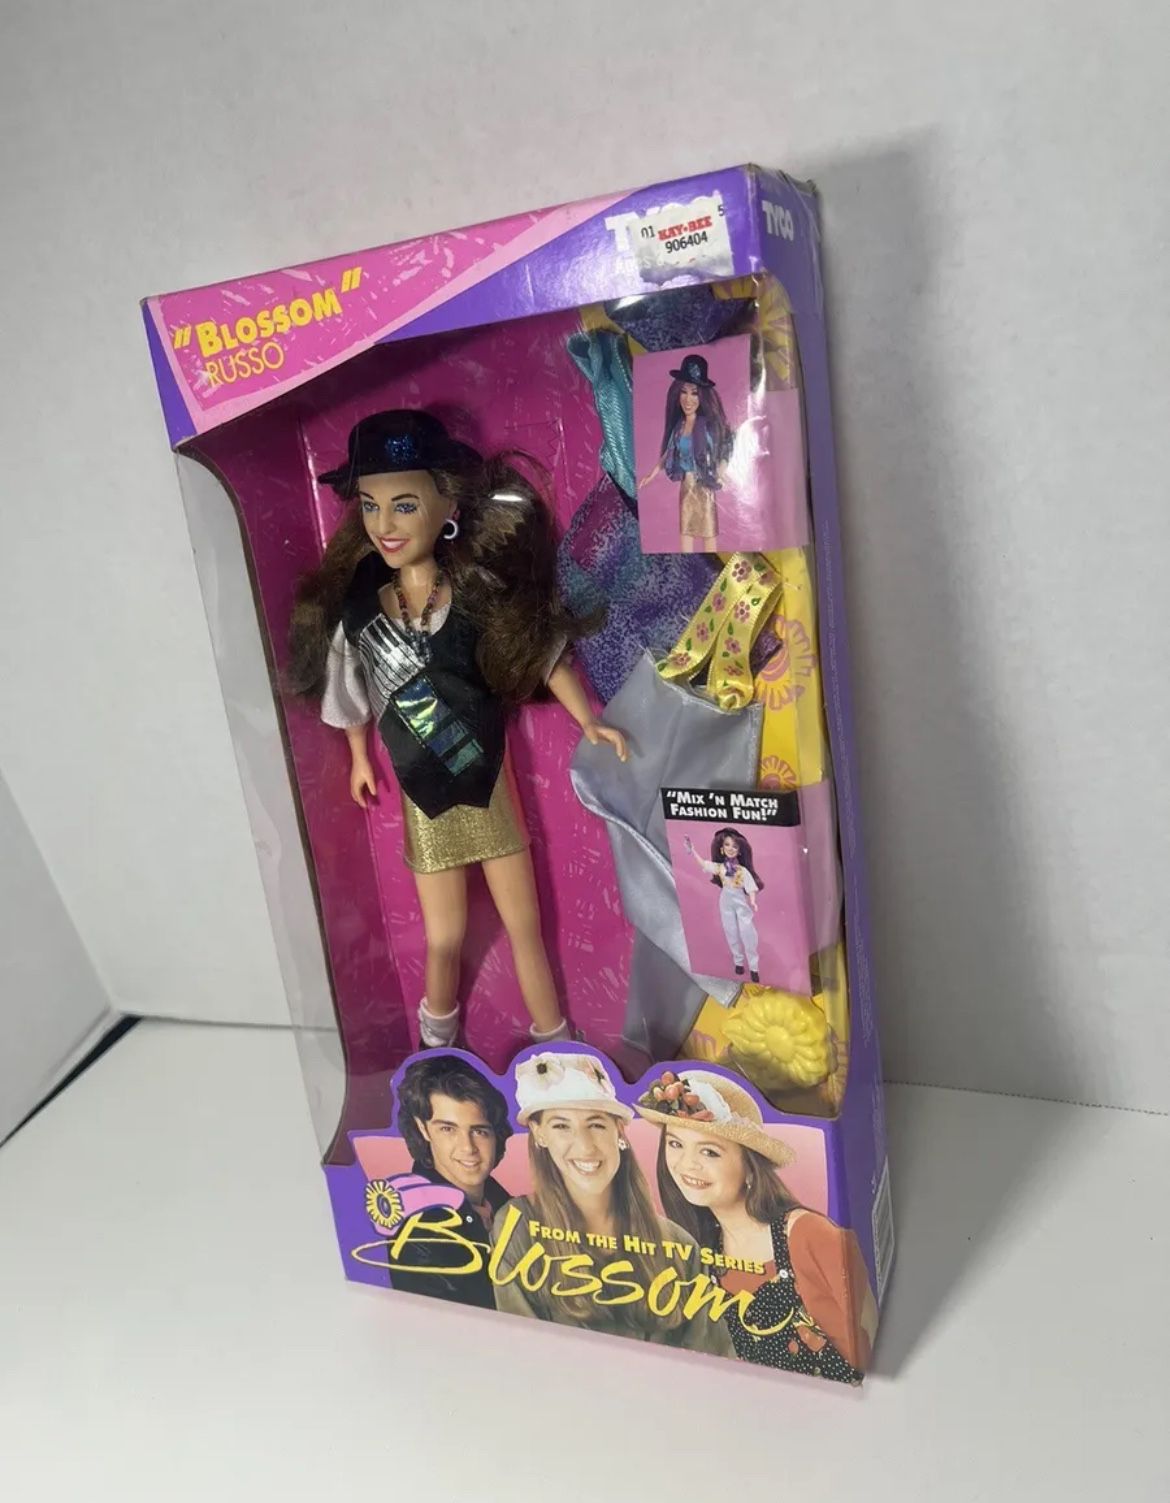 Blossom “Blossom” Russo Doll With Accessories Sealed